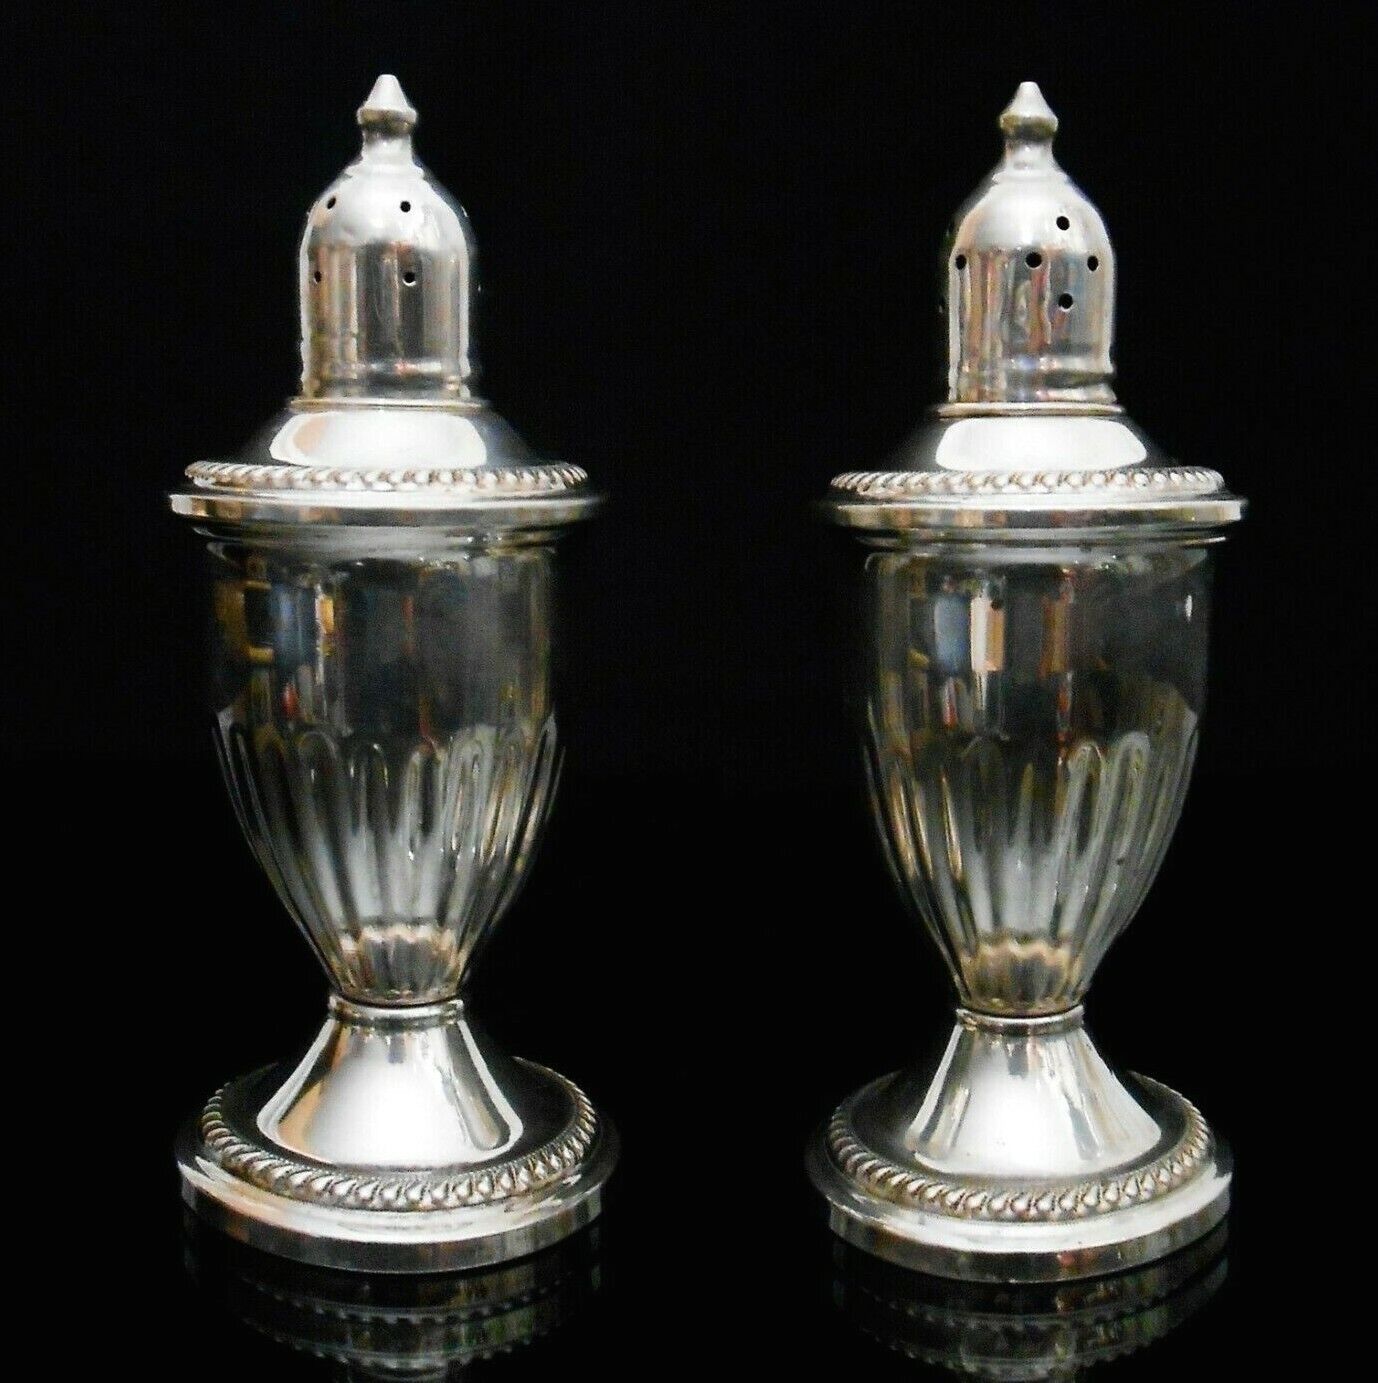 EARLY 20TH C VINT COL REV STERLING SILVER 925 WEIGHTED PAIR SALT/PEPPER SHAKERS